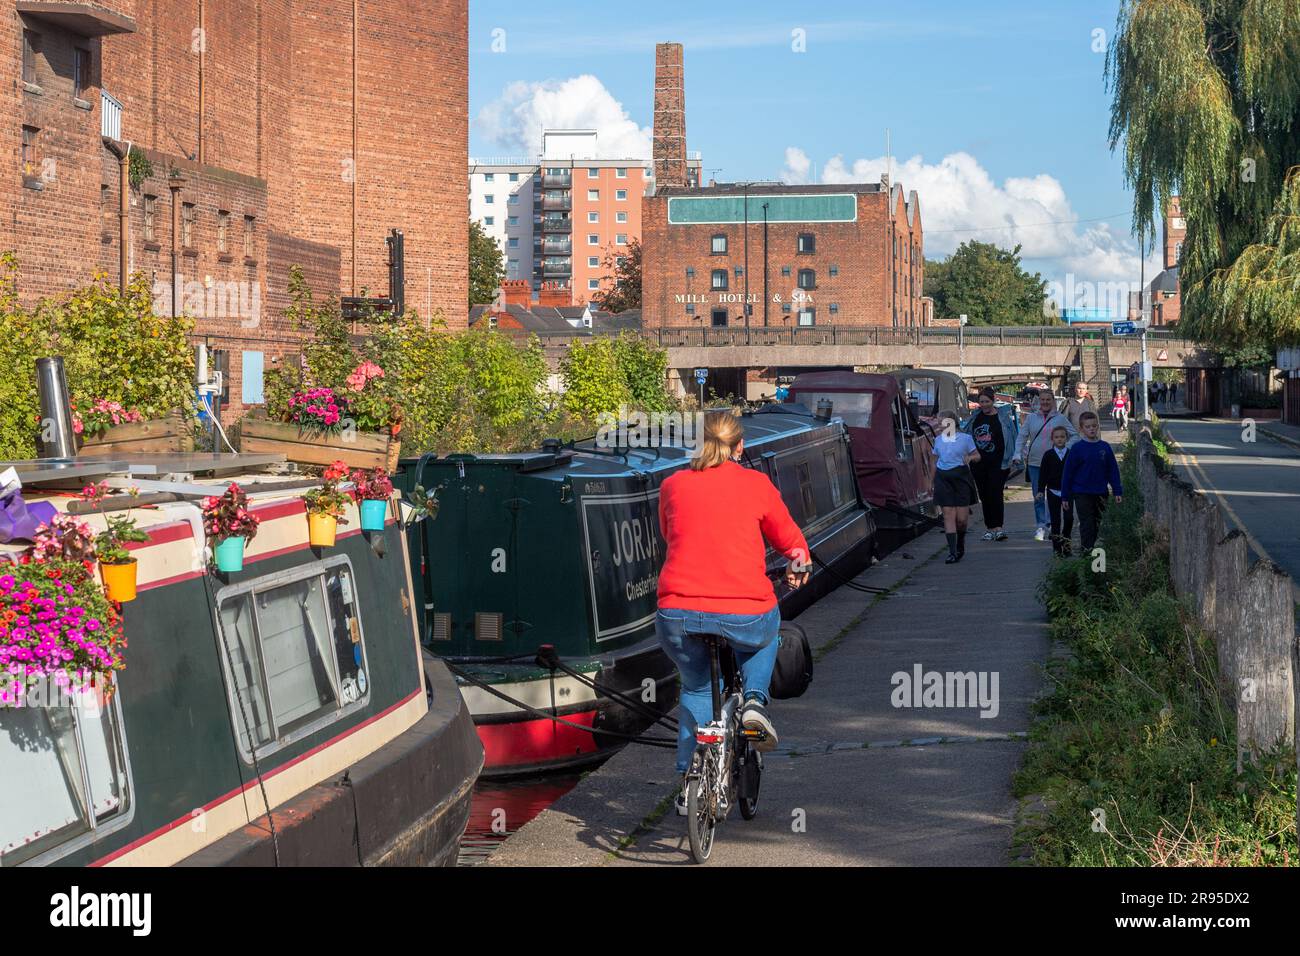 People on the Shropshire Union Canal towpath, Chester, Cheshire, UK. Stock Photo